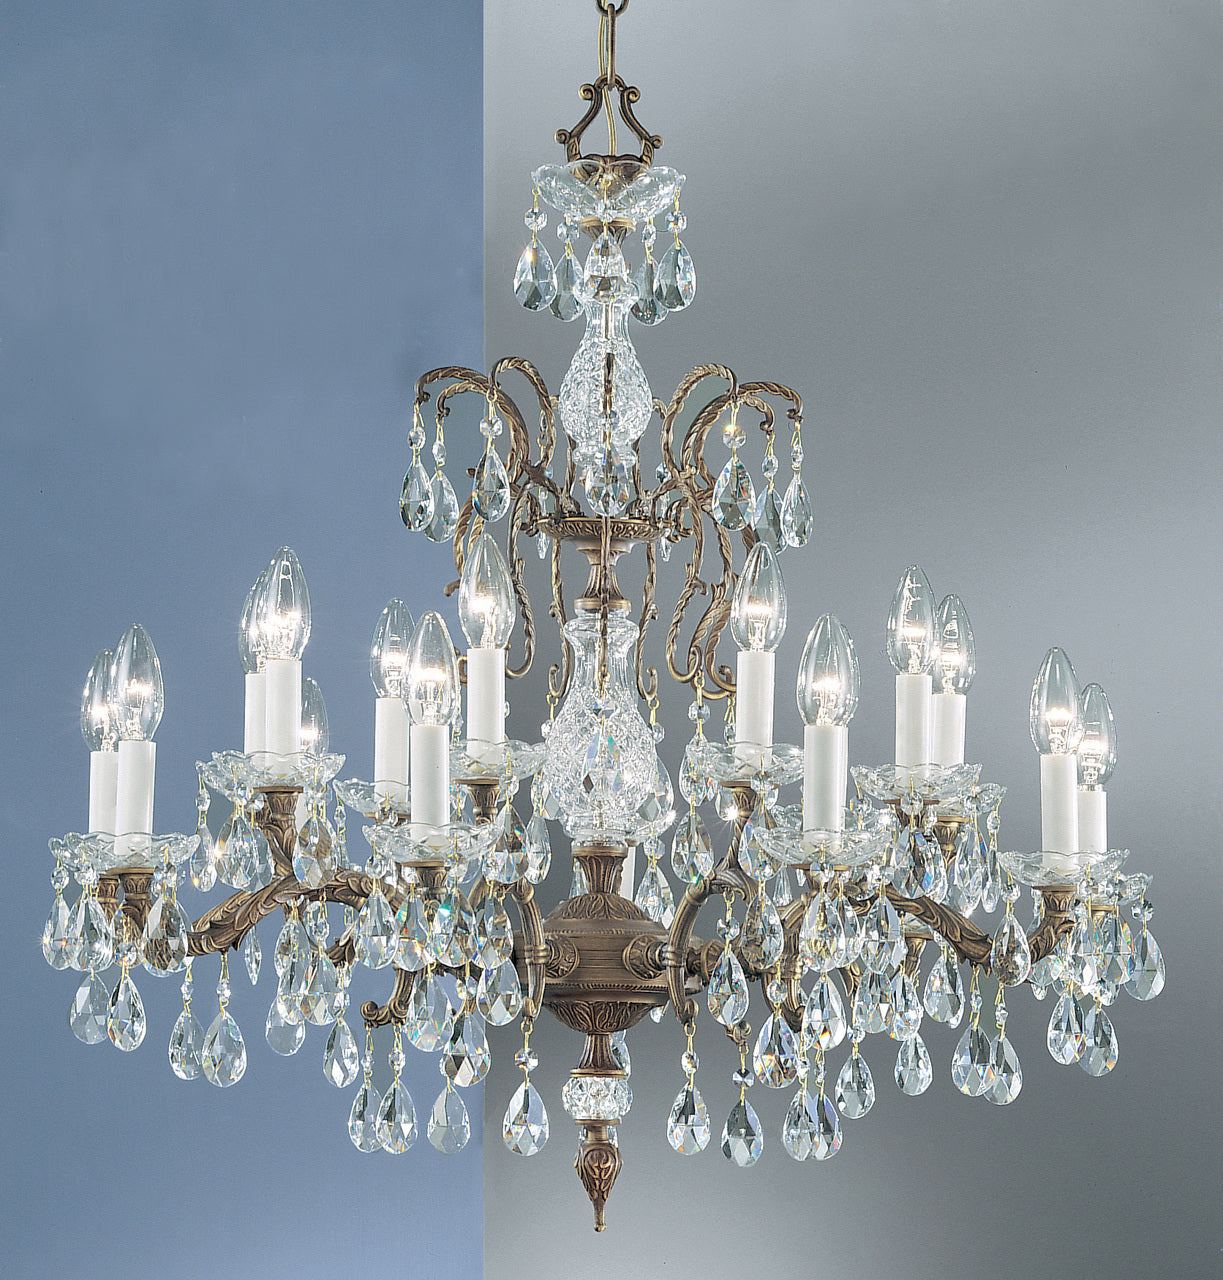 Classic Lighting 5538 RB PAM Madrid Crystal/Cast Brass Chandelier in Roman Bronze (Imported from Spain)